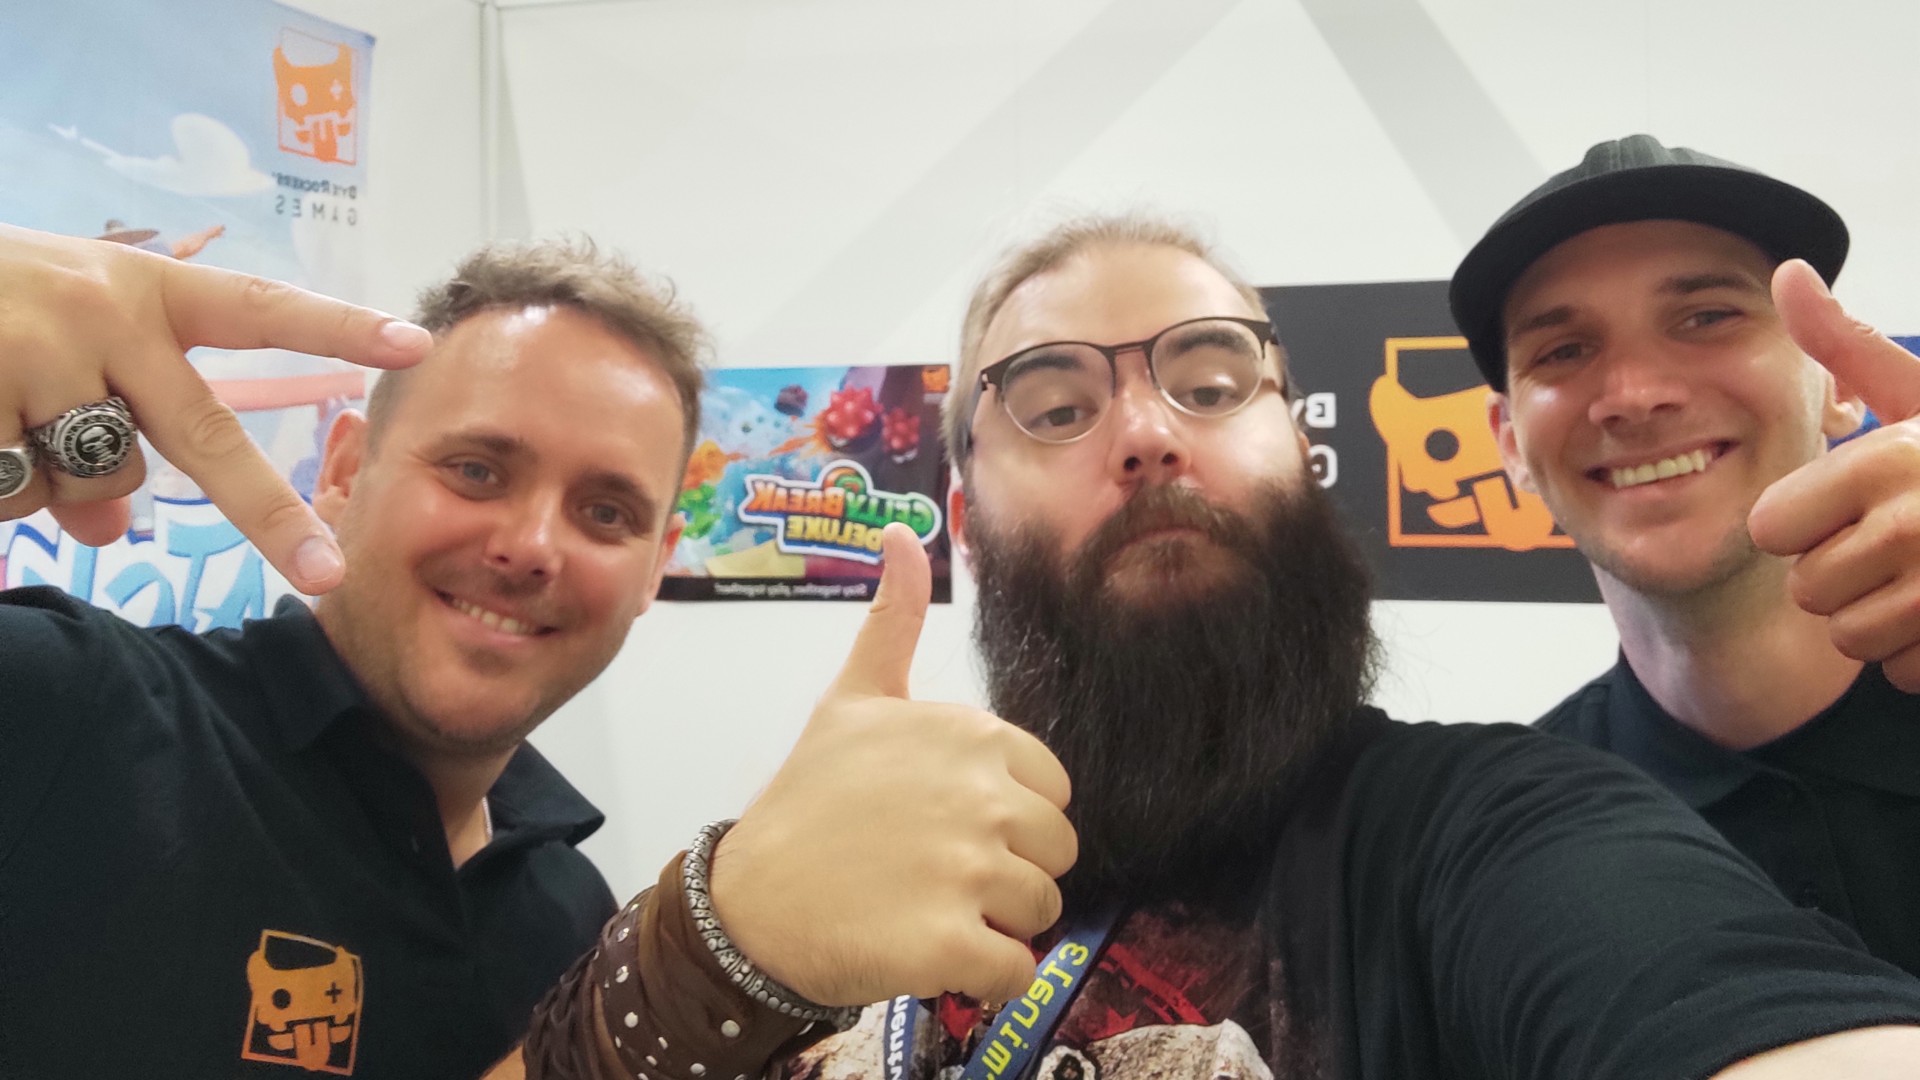 3 cool games from gamescom that are surprisingly good despite the simple concepts